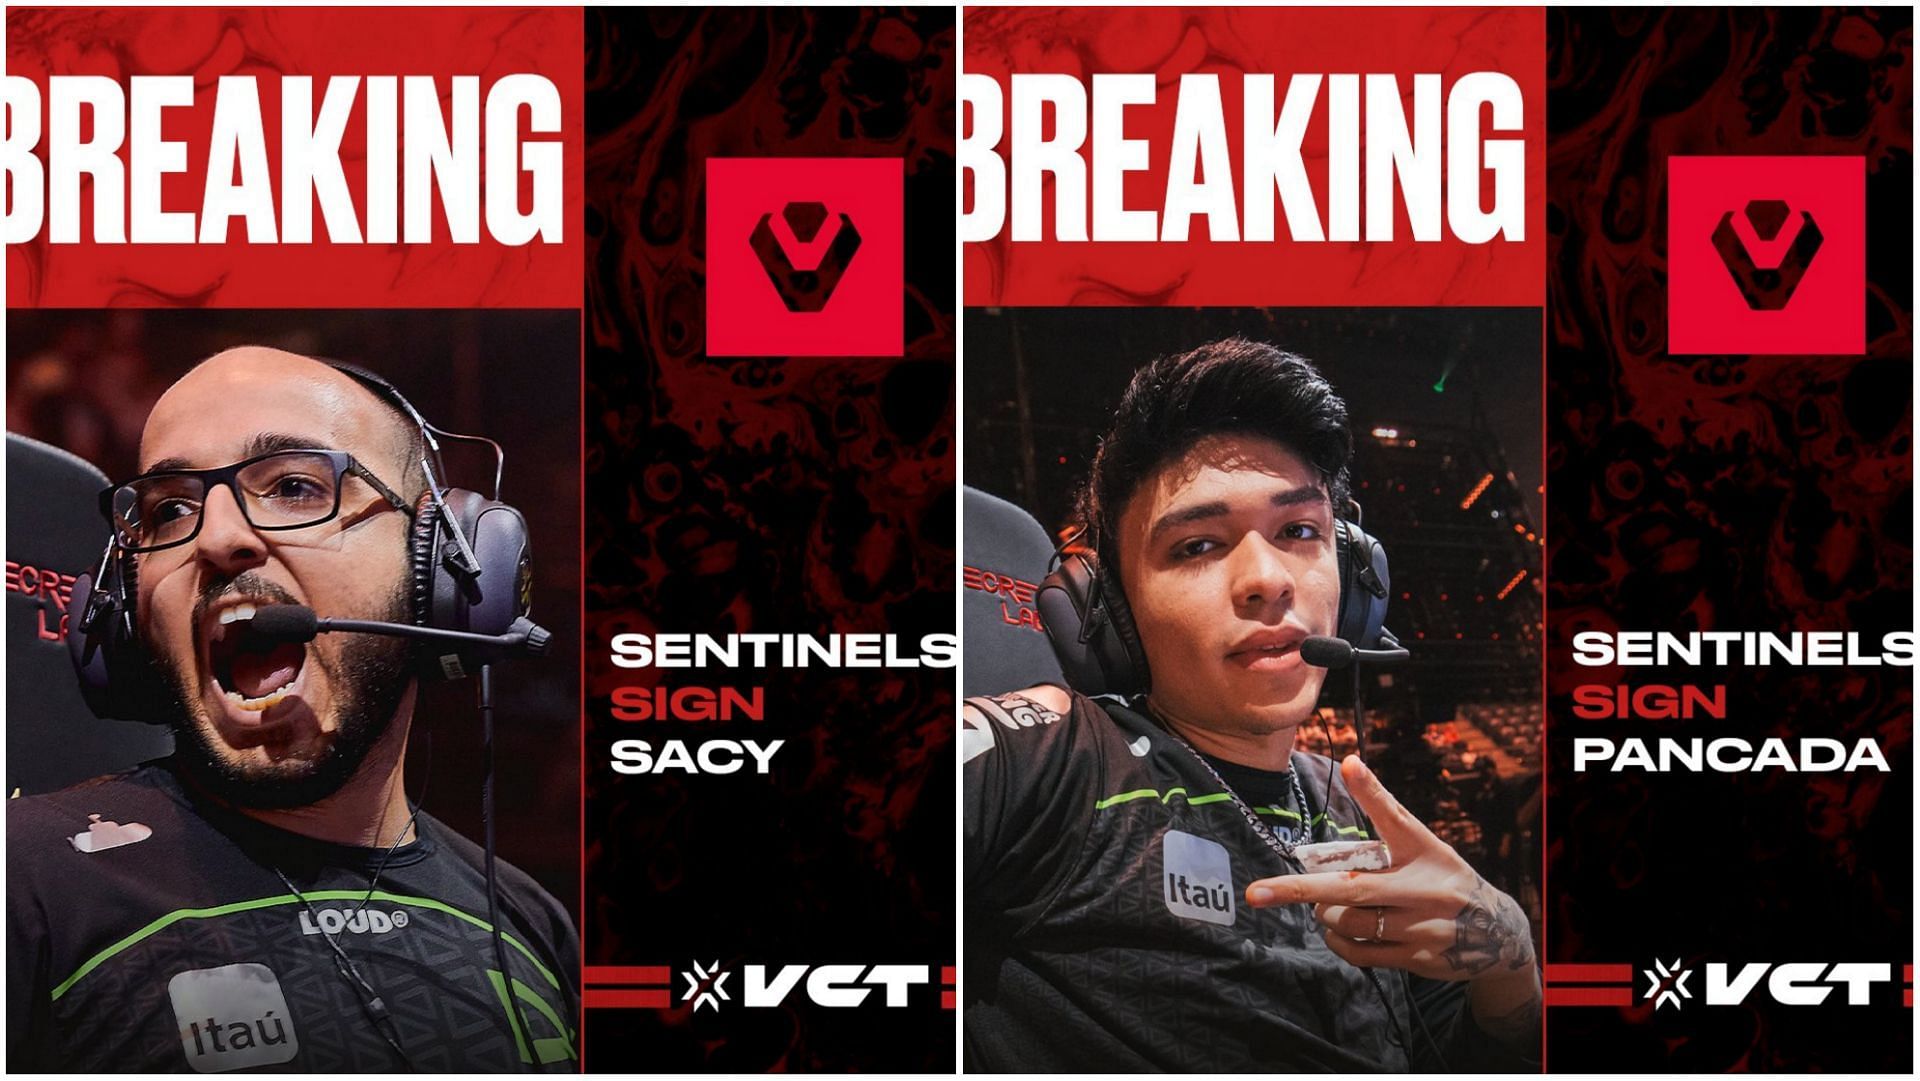 Sentinels look to rebound following a disappointing 2022 by adding reigning champs Sacy and pANcada to its roster. (Images via VCT/Twitter)